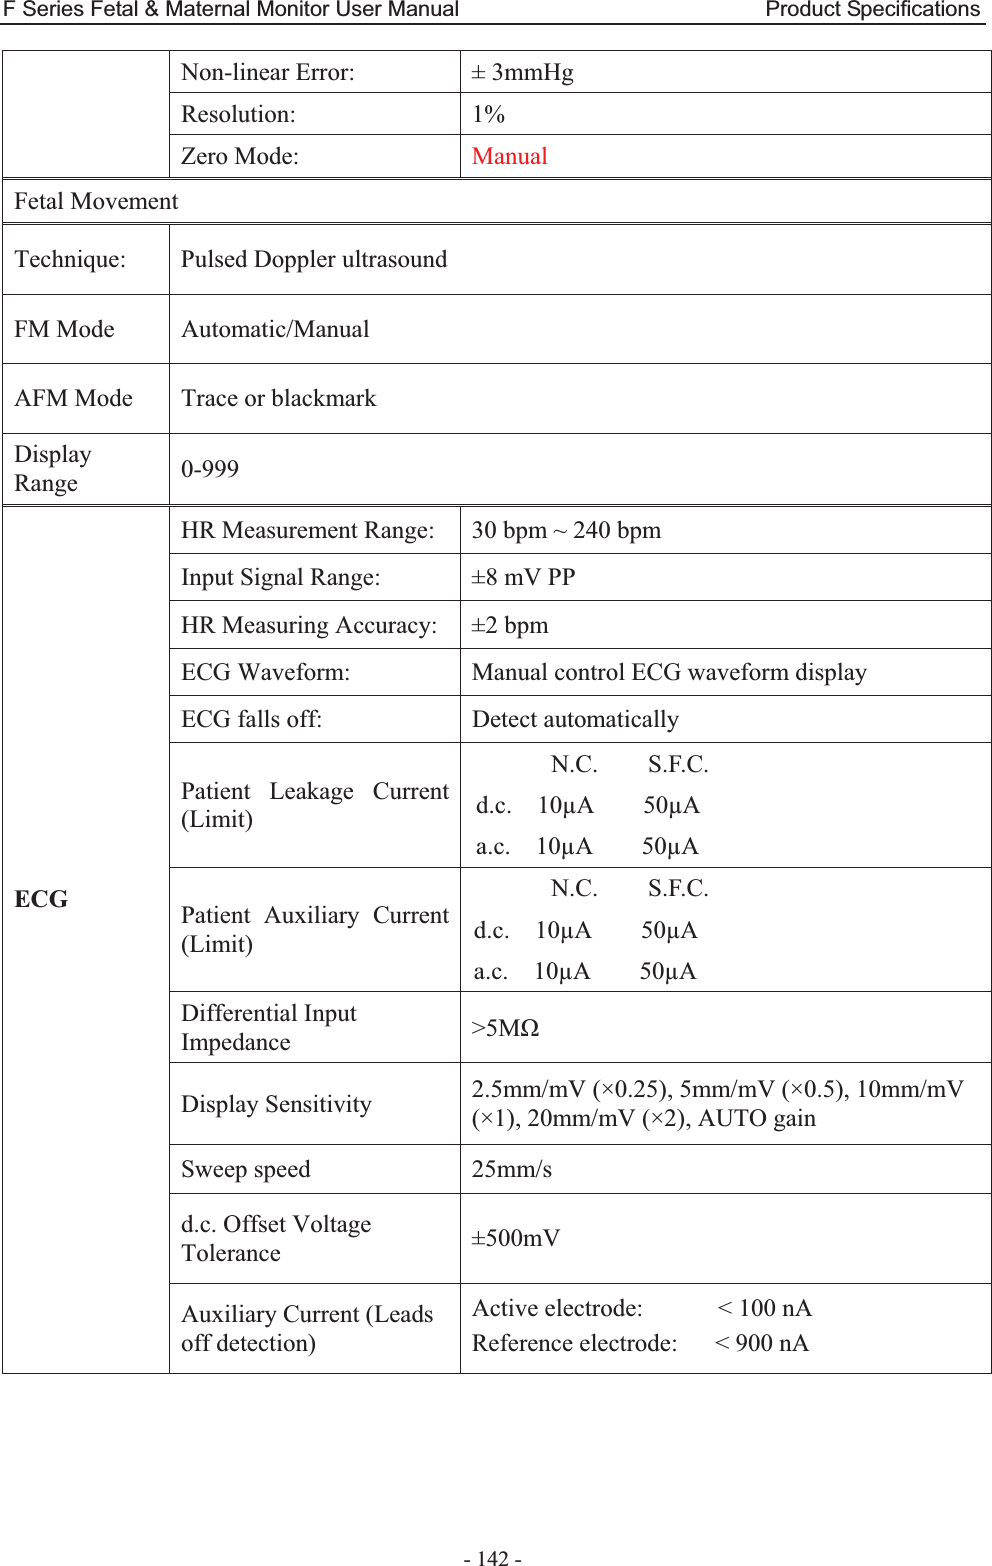 F Series Fetal &amp; Maternal Monitor User Manual                            Product Specifications - 142 - Non-linear Error:  ± 3mmHg Resolution: 1% Zero Mode:  Manual Fetal Movement Technique:  Pulsed Doppler ultrasound FM Mode  Automatic/Manual AFM Mode  Trace or blackmark Display Range  0-999 ECGHR Measurement Range:  30 bpm ~ 240 bpm Input Signal Range:  ±8 mV PP HR Measuring Accuracy:  ±2 bpm ECG Waveform:  Manual control ECG waveform display ECG falls off:    Detect automatically Patient Leakage Current (Limit) N.C.    S.F.C. d.c.  10μA    50μA a.c.  10μA    50μA Patient Auxiliary Current (Limit) N.C.    S.F.C. d.c.  10μA    50μA a.c.  10μA    50μA Differential Input Impedance  &gt;5Mȍ Display Sensitivity  2.5mm/mV (×0.25), 5mm/mV (×0.5), 10mm/mV (×1), 20mm/mV (×2), AUTO gain Sweep speed  25mm/s d.c. Offset Voltage Tolerance  ±500mV Auxiliary Current (Leads off detection) Active electrode:      &lt; 100 nA Reference electrode:      &lt; 900 nA 